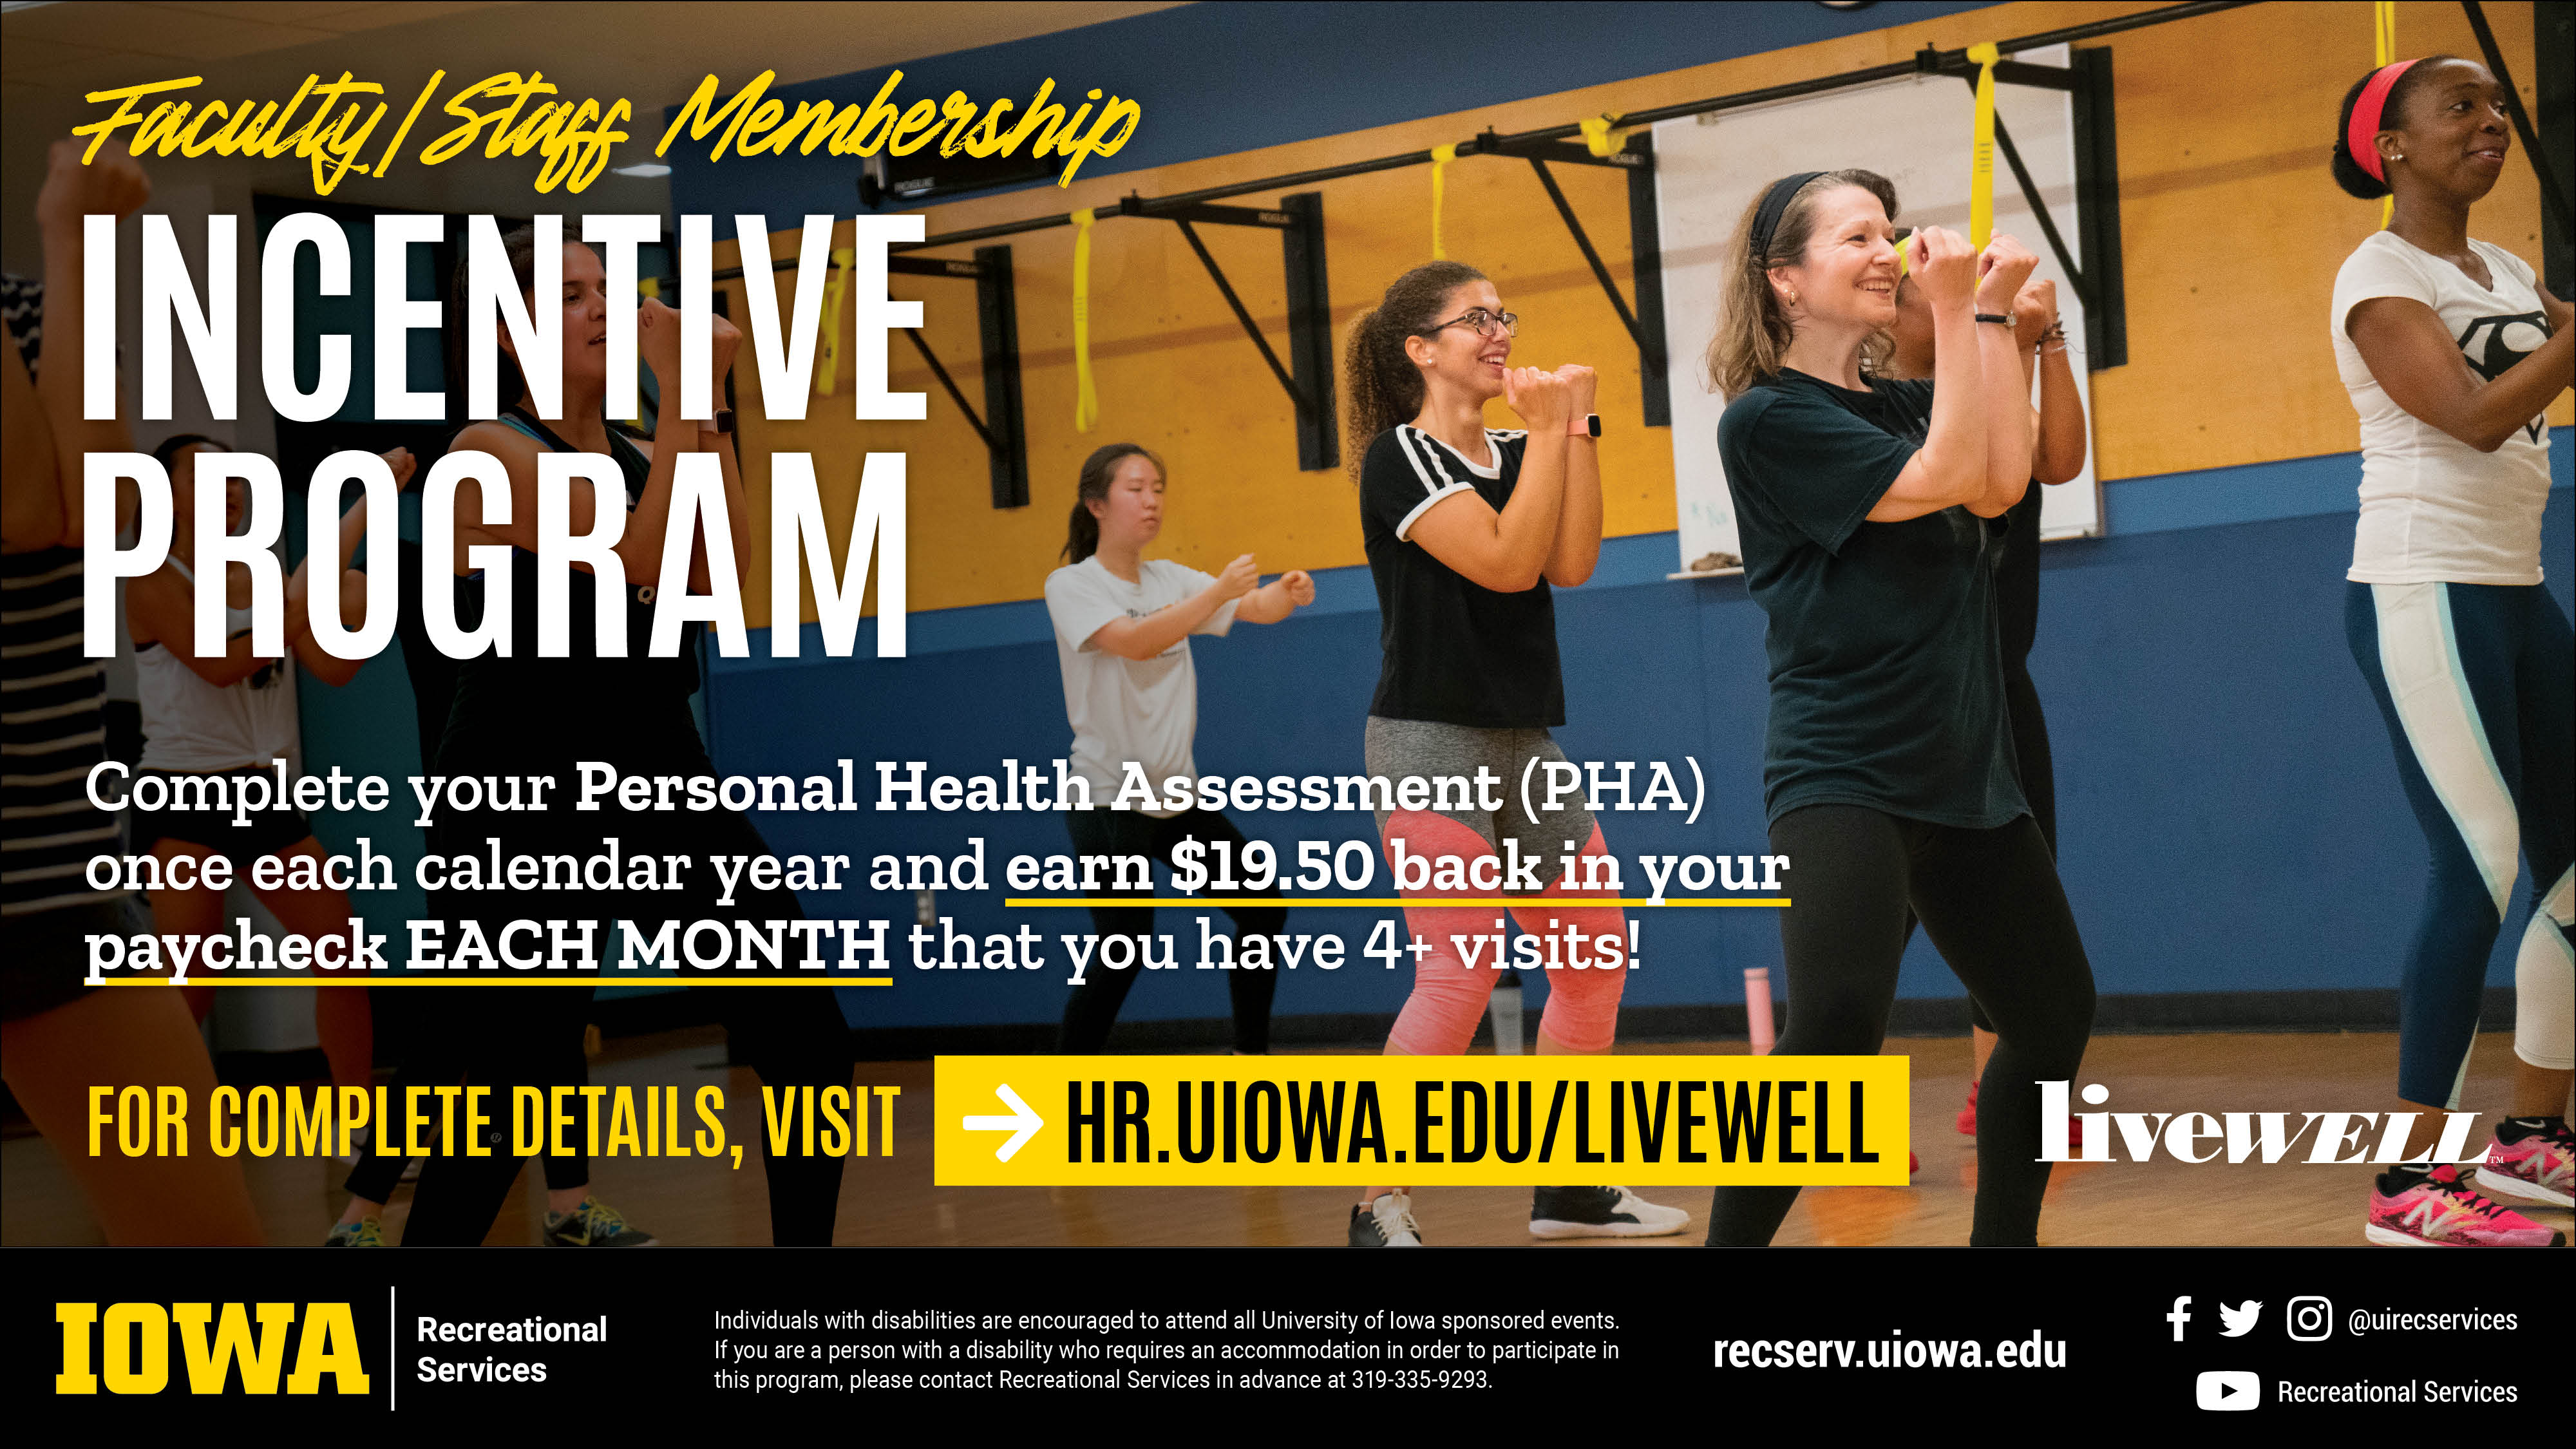 Earn $19.50 back in your paycheck Each Month that you complete your visits! Faculty/Staff Membership Incentive Program. Active fac/staff in 50% or greater regular position. Complete a PHA once each calendar year. Visit on of the 4 rec facilities at least 4x per month. Must enroll in payroll deduction for your membership. Visit recserv.uiowa.edu/faculty-staff-membership for more information.